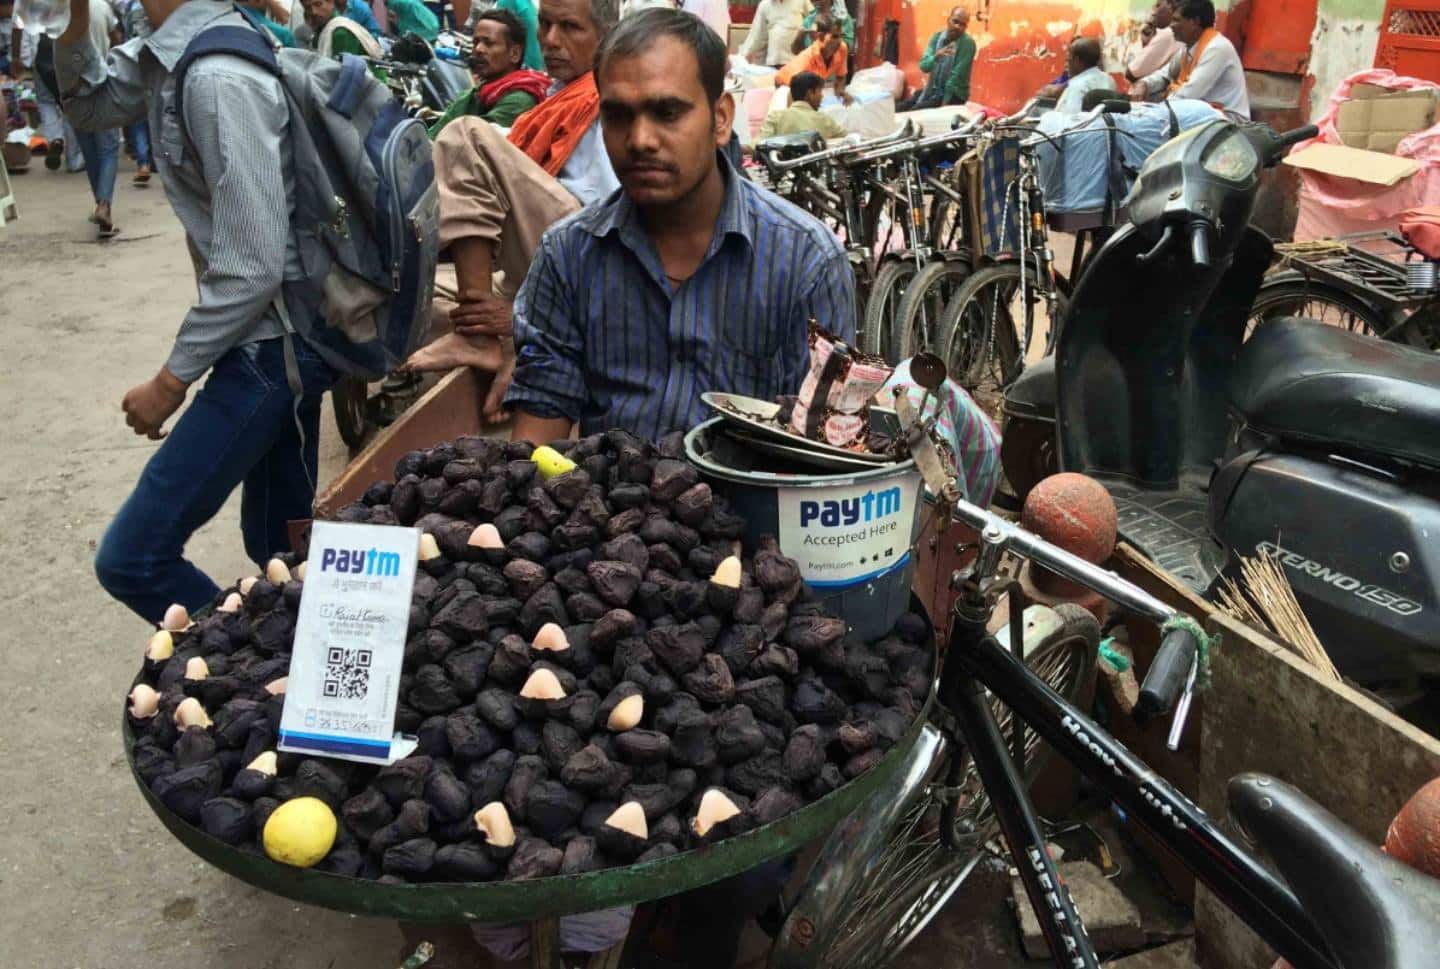 This image of a street hawker using Paytm has gone viral